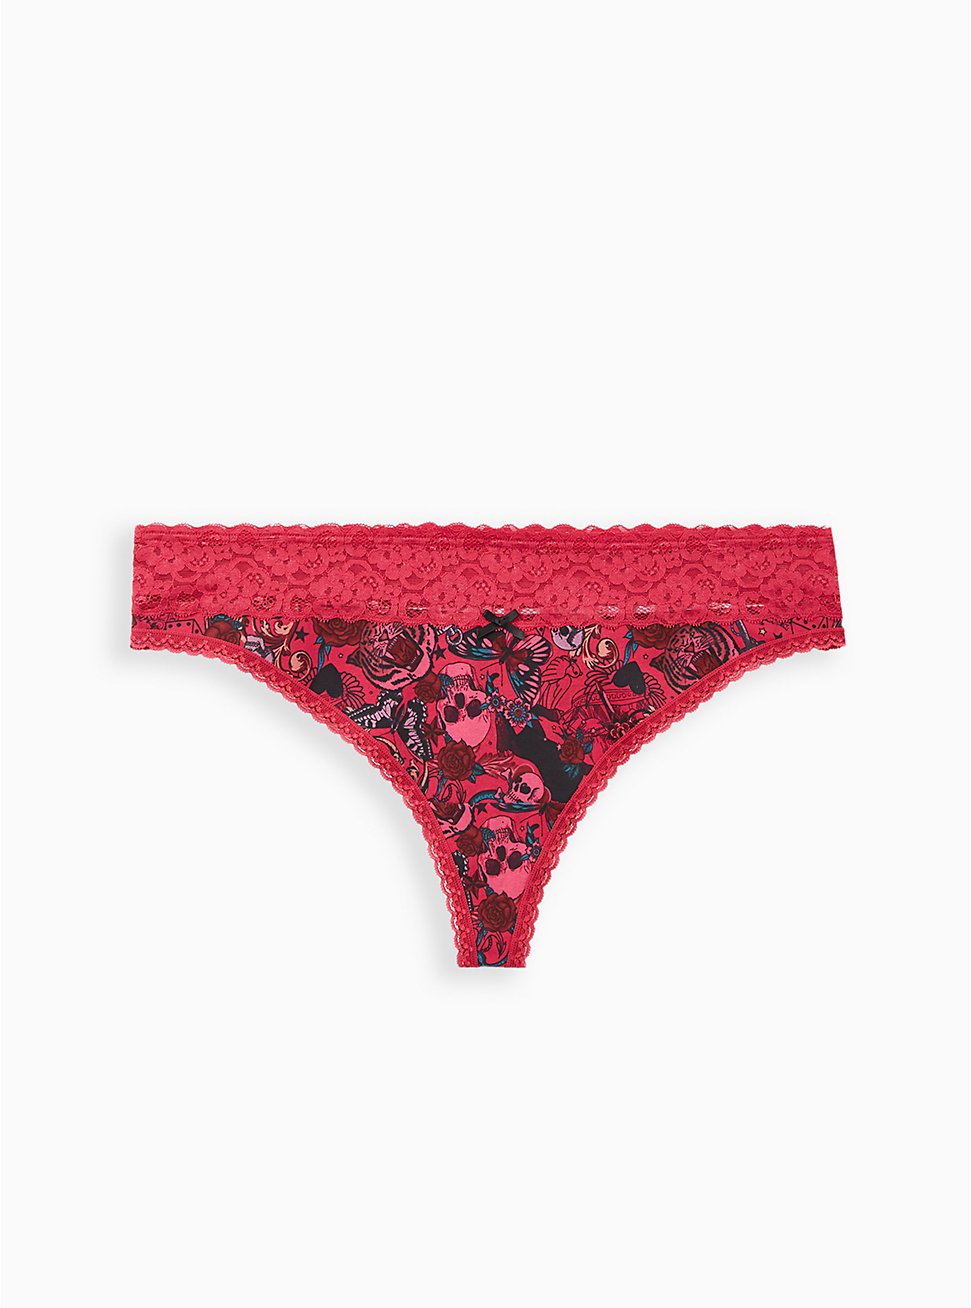 Plus Size - Wide Lace Trim Thong Panty - Cotton Tattoo Pink - Torrid